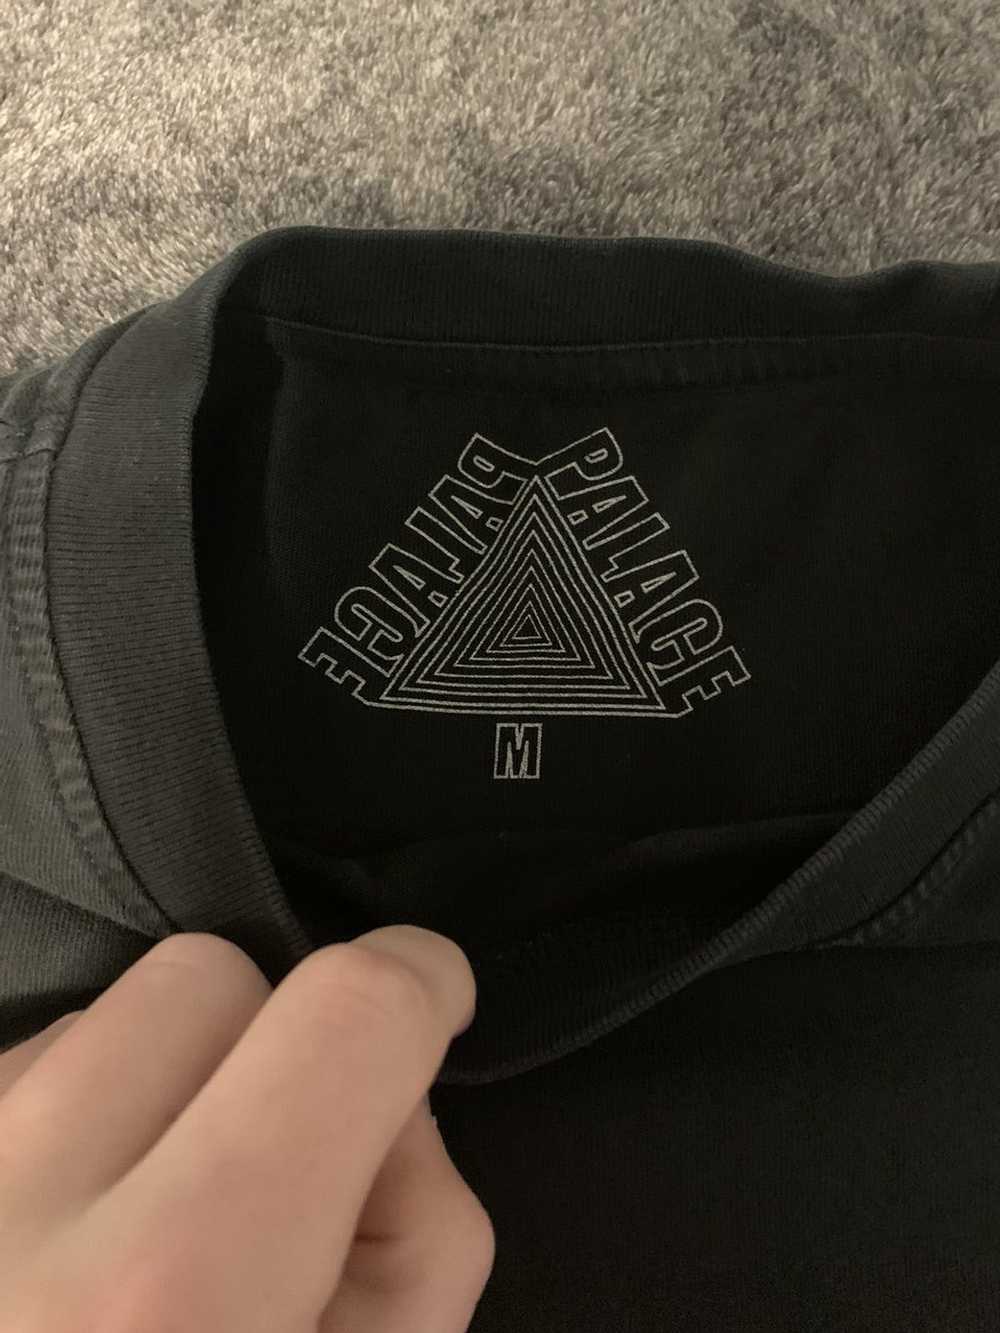 Palace x Gucci, Tri-Ferg GG Ivory Hoodie XS New with Tags and Box